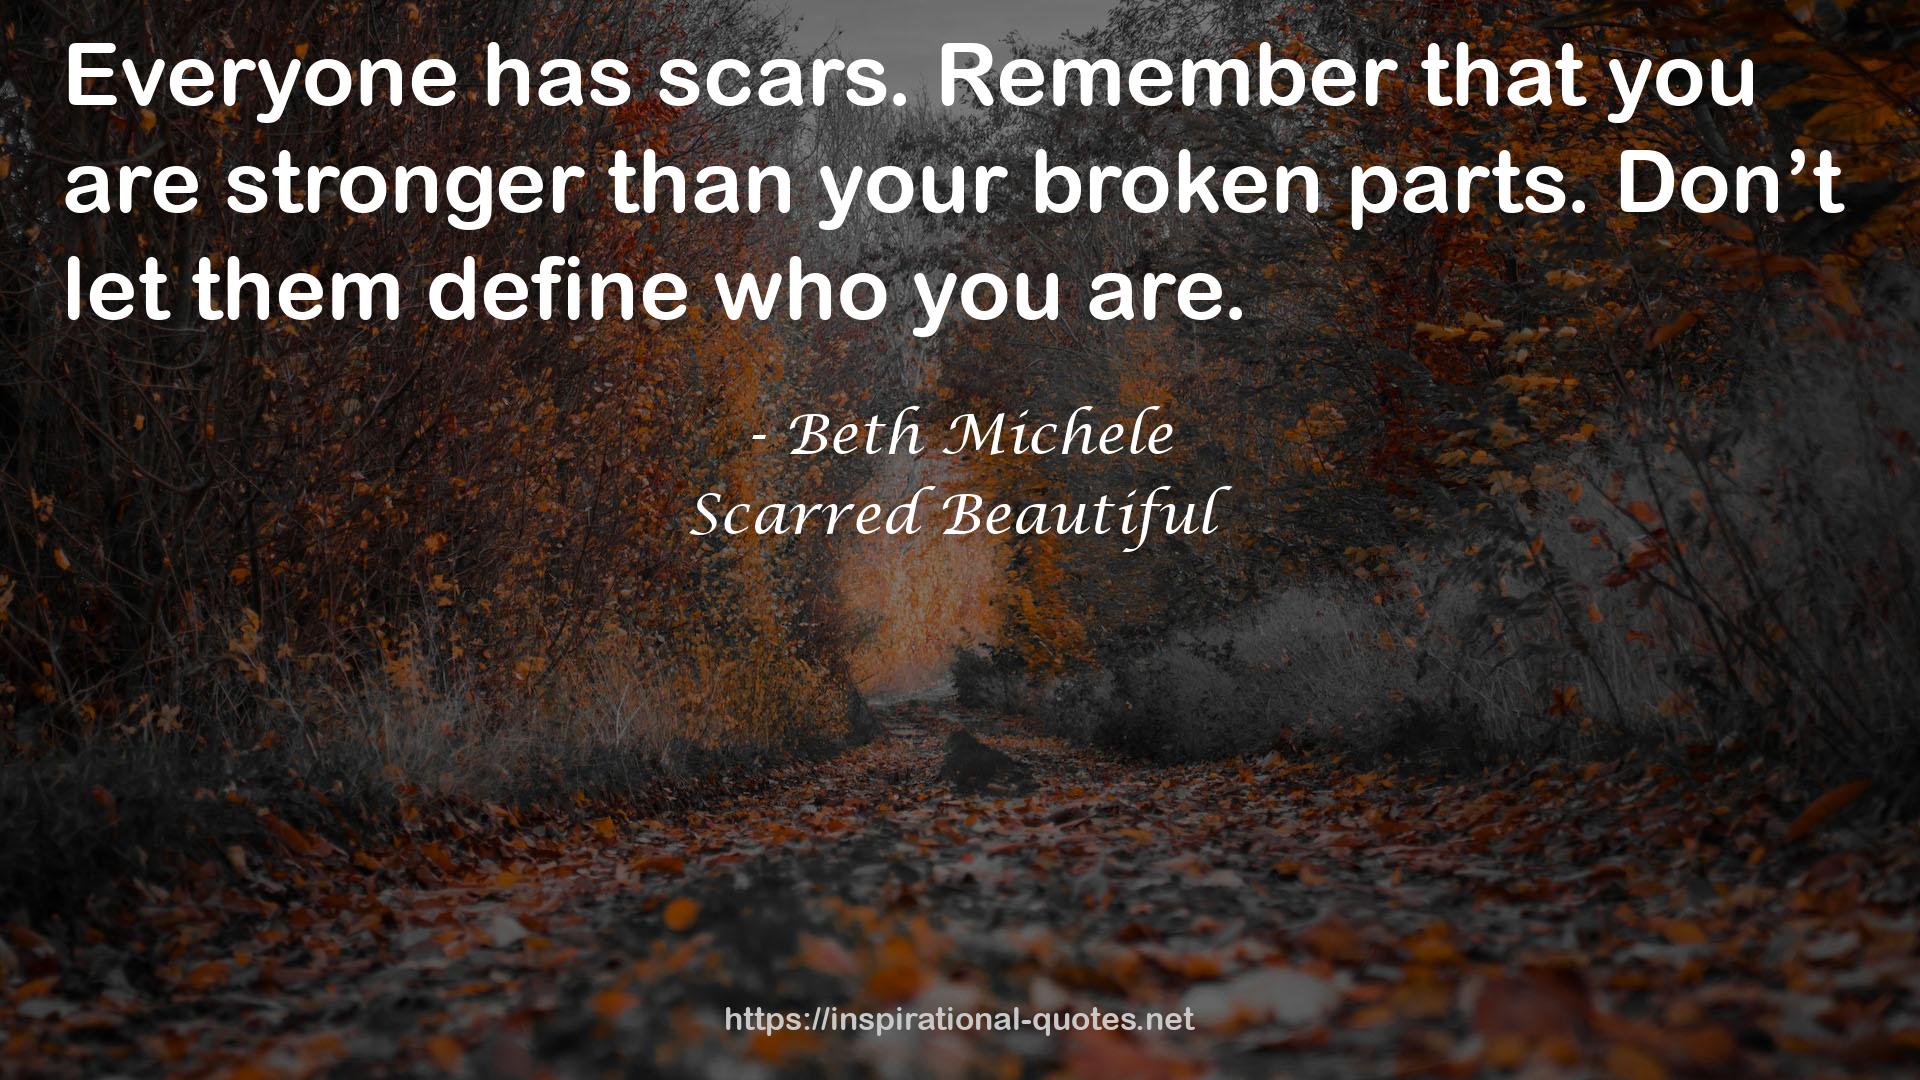 Scarred Beautiful QUOTES